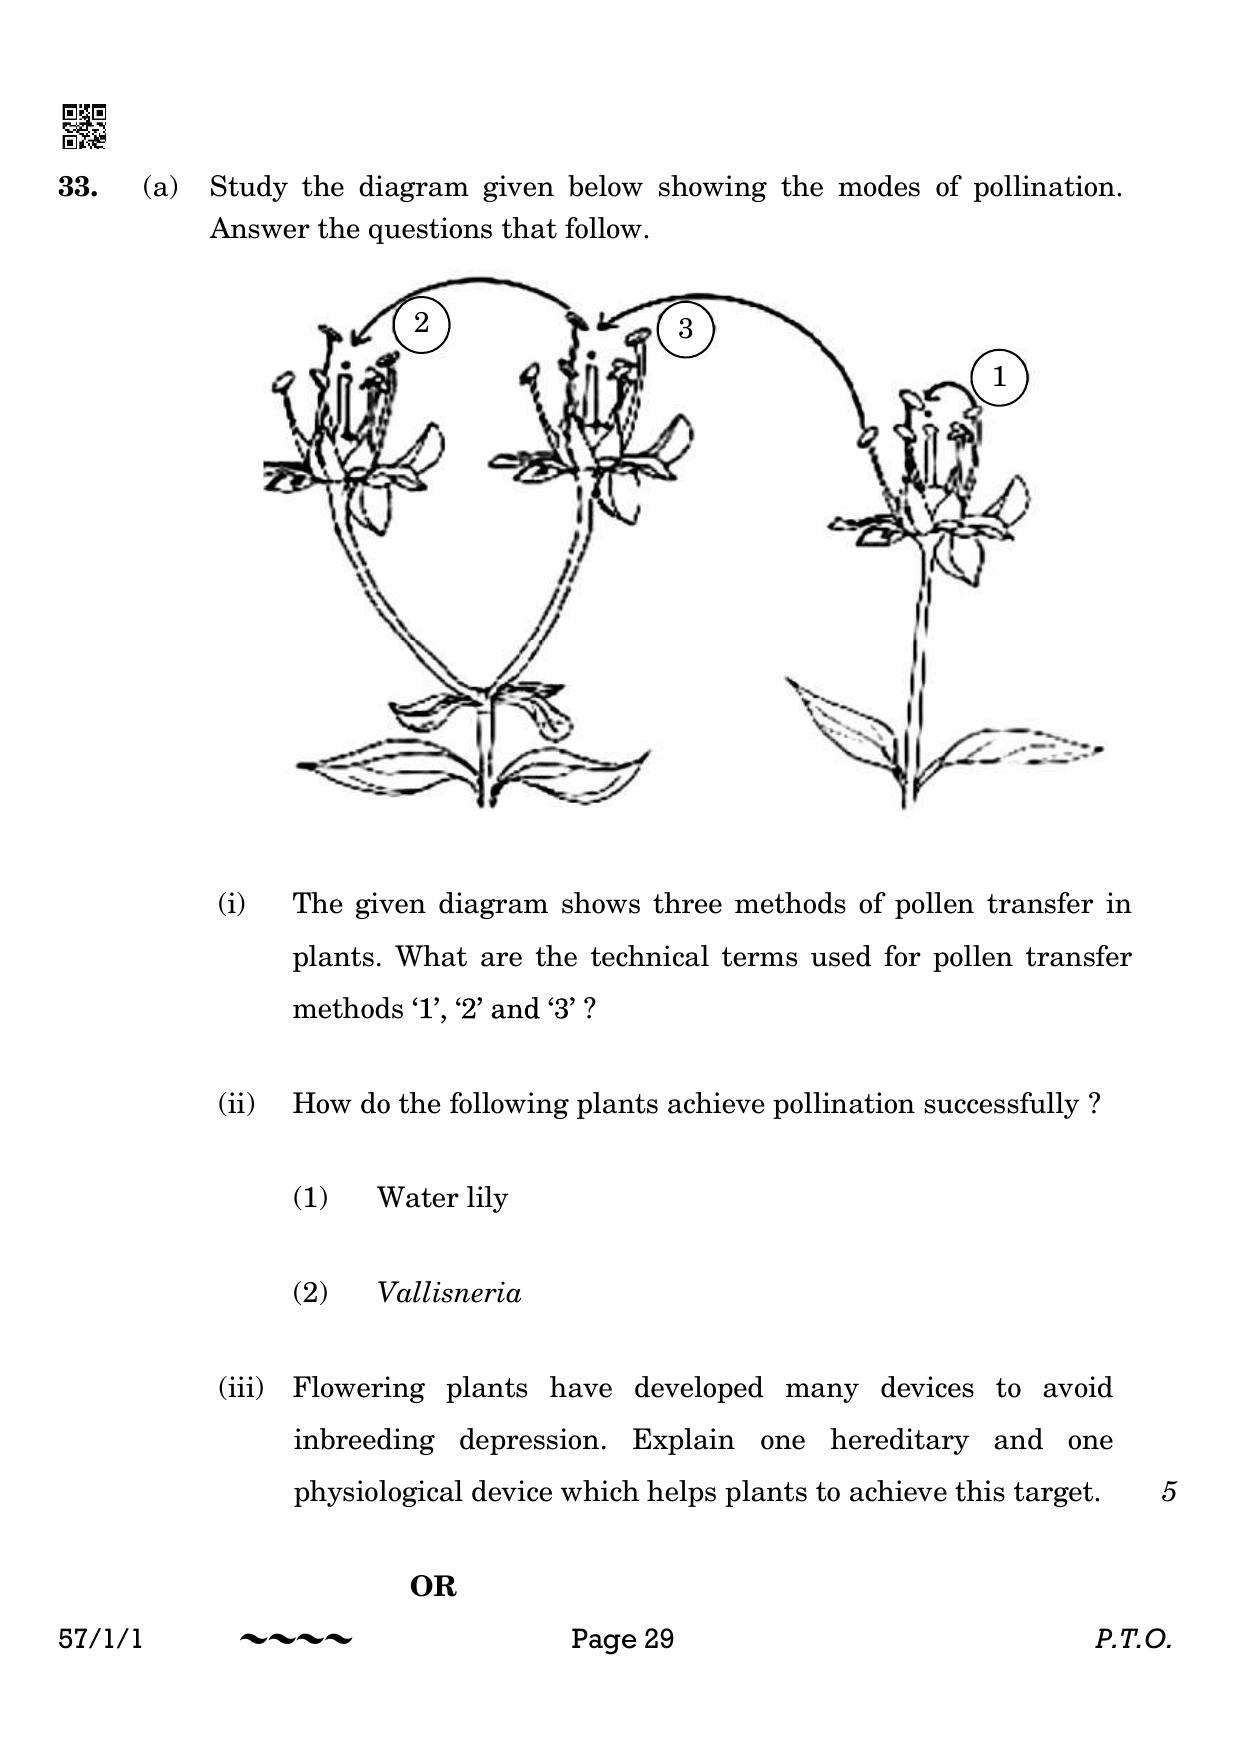 CBSE Class 12 57-1-1 Biology 2023 Question Paper - Page 29